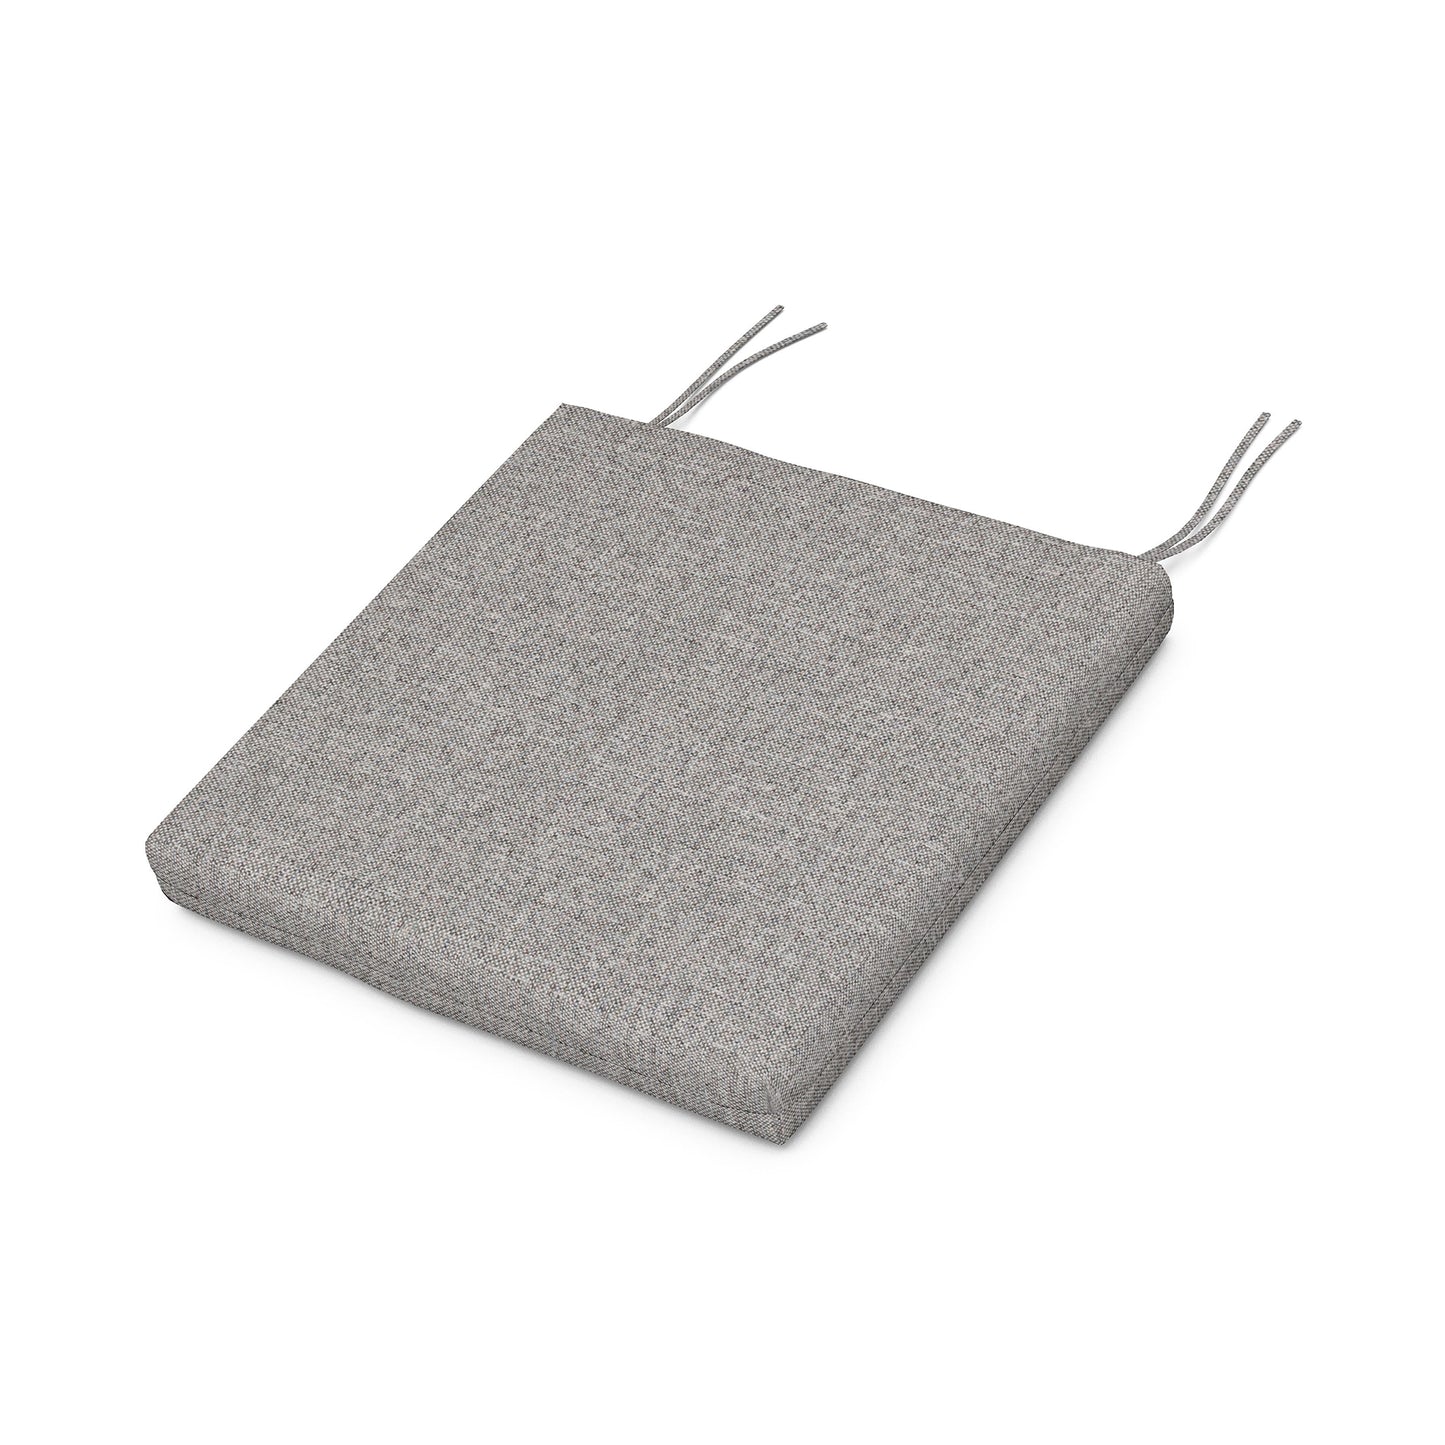 A simple square XPWS0006 - Seat Cushion in a light gray, weather-resistant upholstery fabric with two ties at the back for securing it to a chair. The cushion rests on a white background.